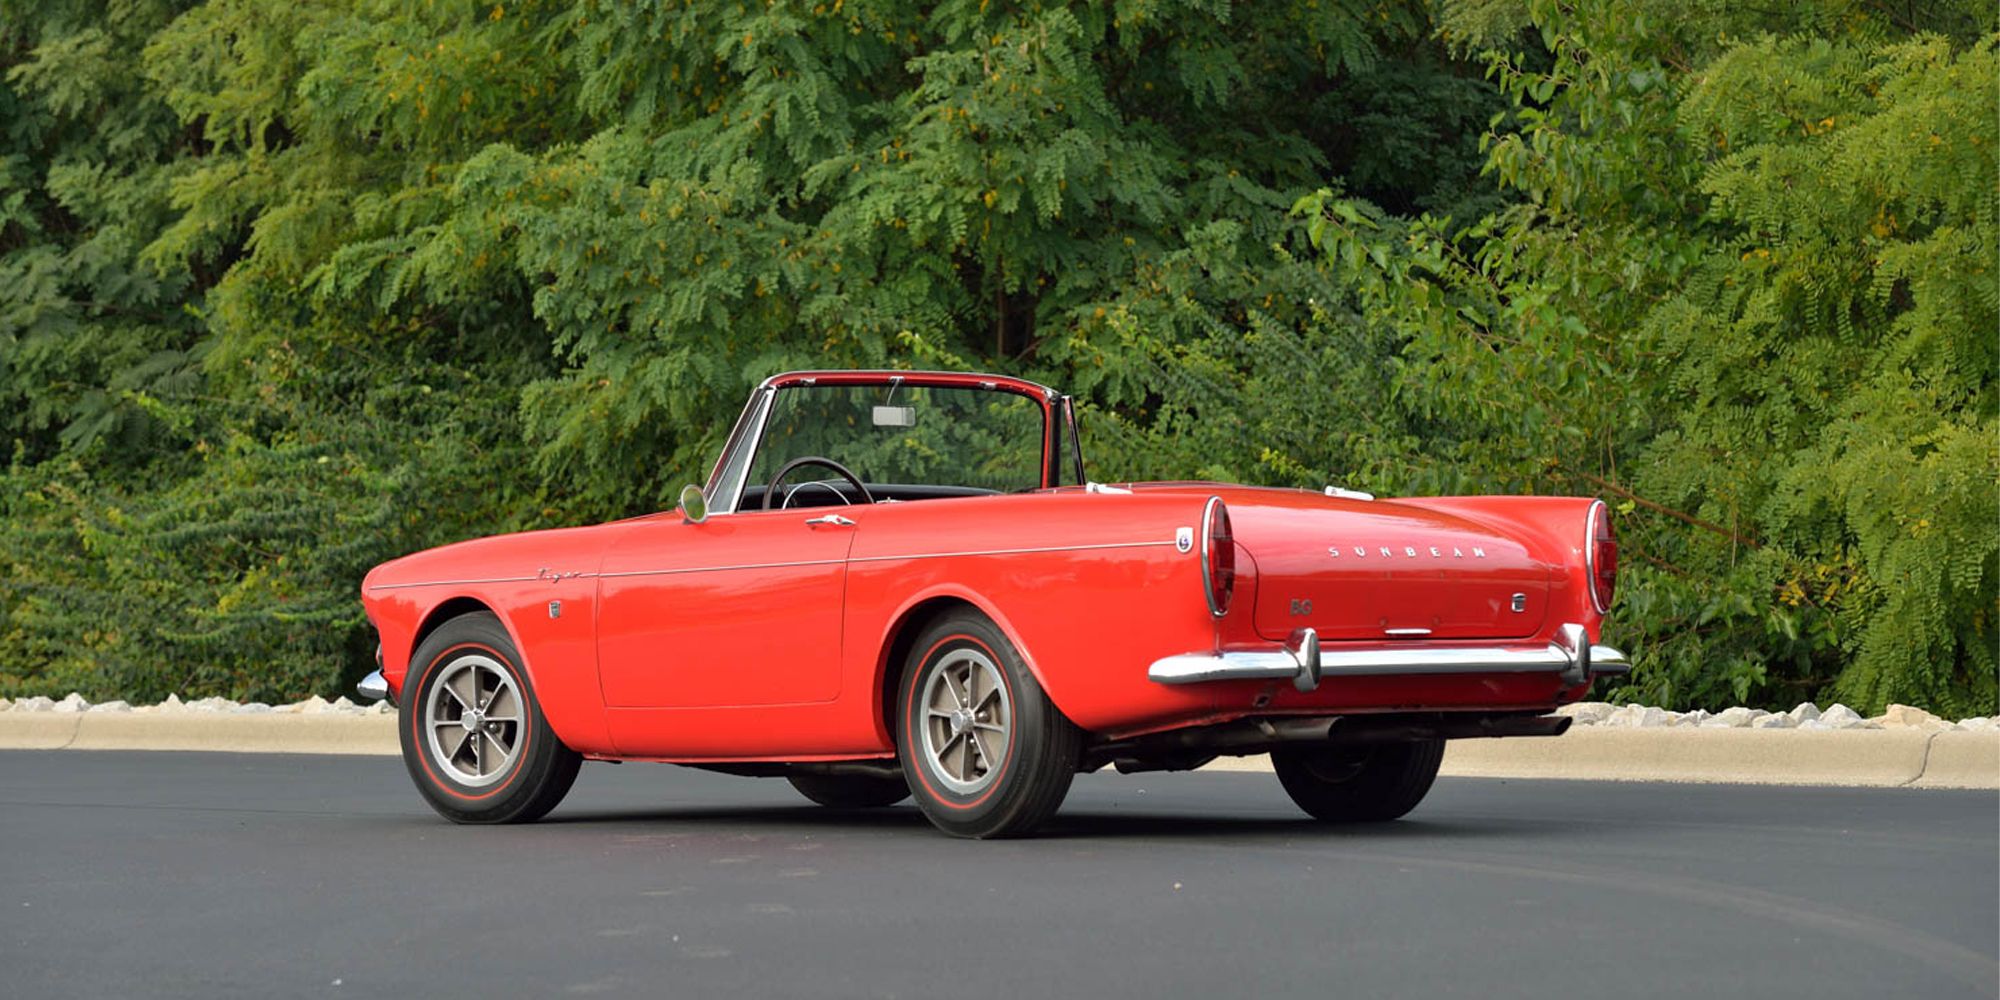 Rear 3/4 view of the Sunbeam Tiger